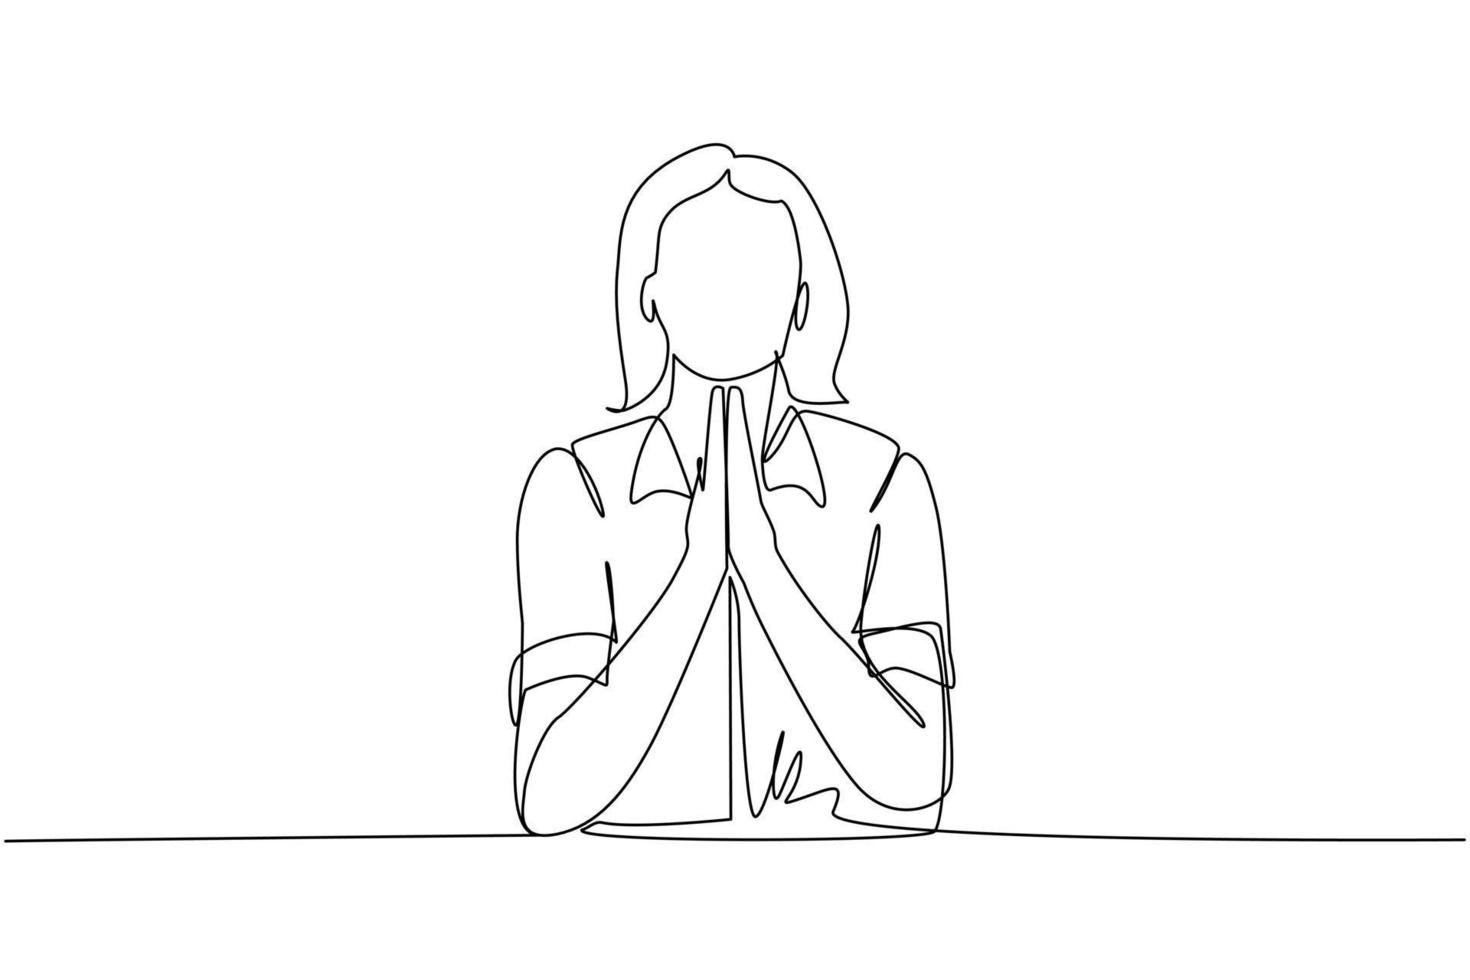 Continuous one line drawing young woman in closed eyes praying hands together. Trendy person holding palms in prayer. Human emotion, body language. Single line draw design vector graphic illustration